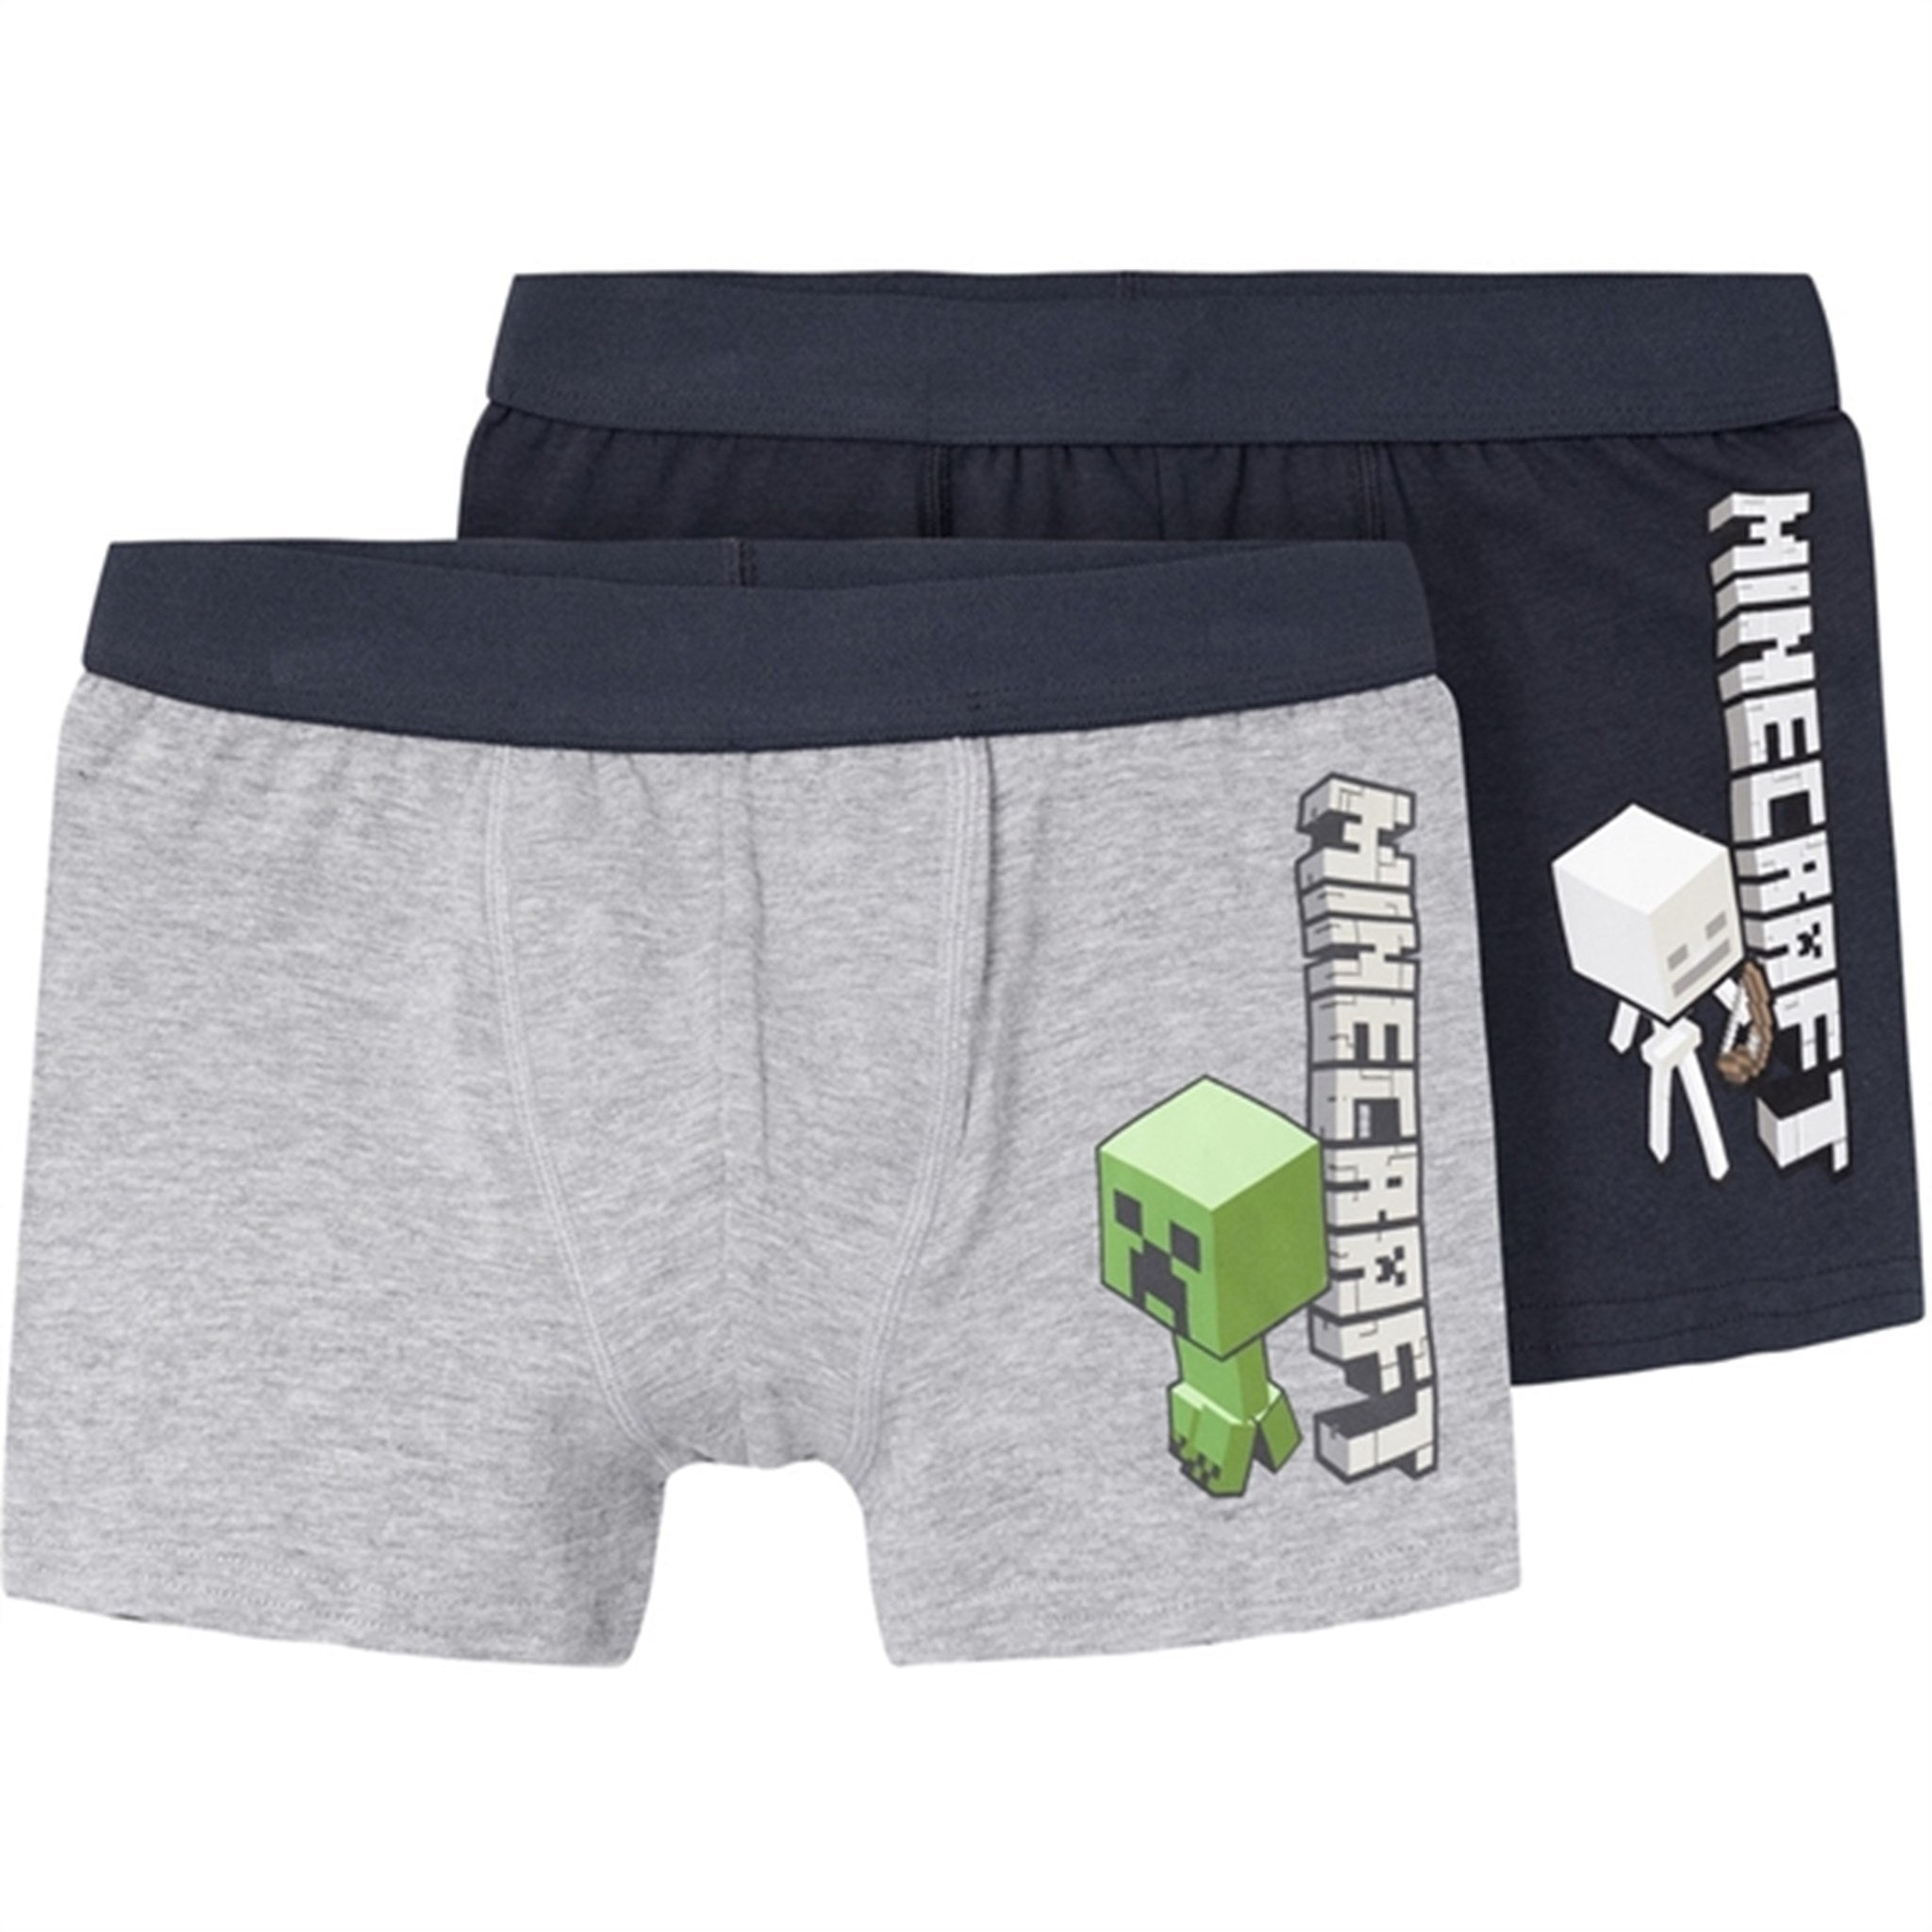 Name it India Ink Olas Minecraft Boxers 2-pack